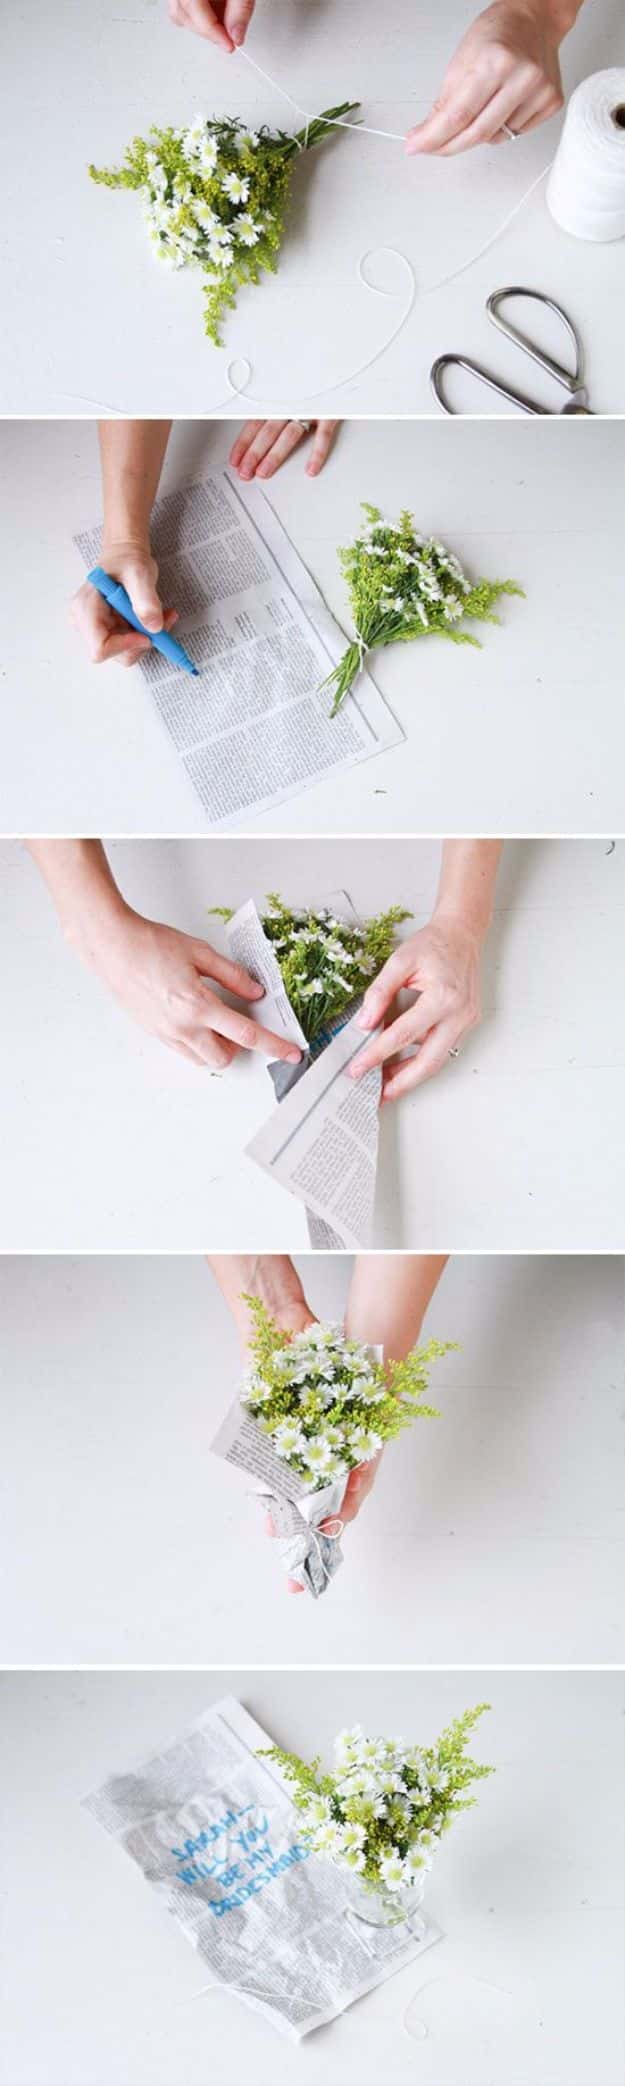 DIY Flowers for Weddings - $2 Mini Message Bouquet DIY - Centerpieces, Bouquets, Arrangements for Wedding Ceremony - Aisle Ideas, Rustic Bouquet Projects - Paper, Cheap, Fake Floral, Silk Flower Centerpiece To Make For Brides on A Budget - Decor for Spring, Summer, Winter and Fall http://diyjoy.com/diy-flowers-for-weddings